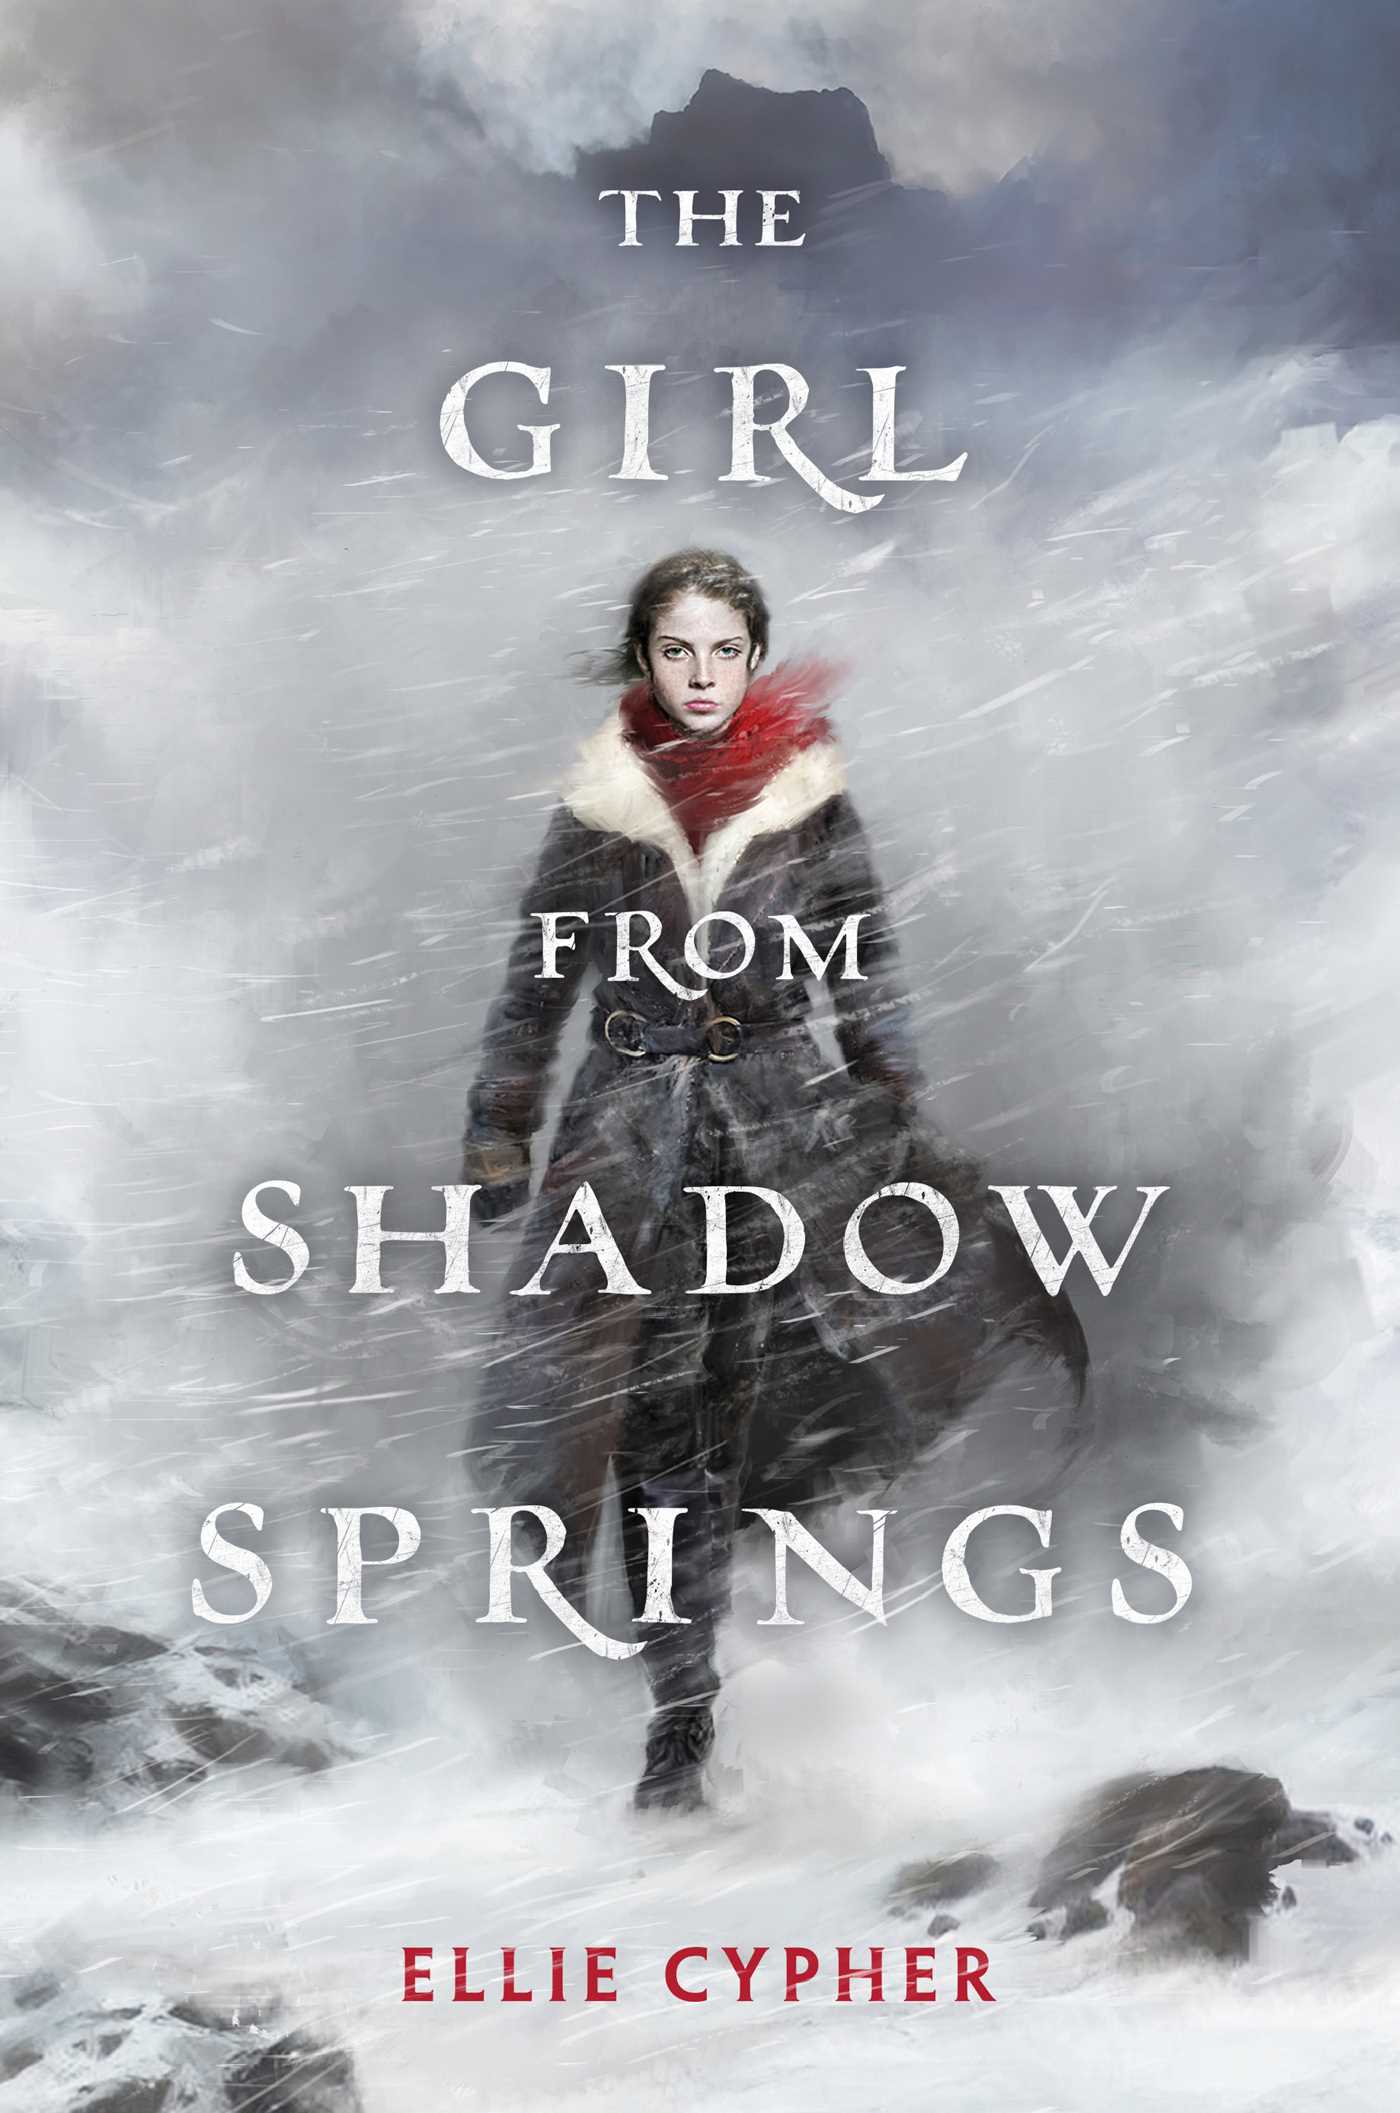 Image for "The Girl from Shadow Springs"